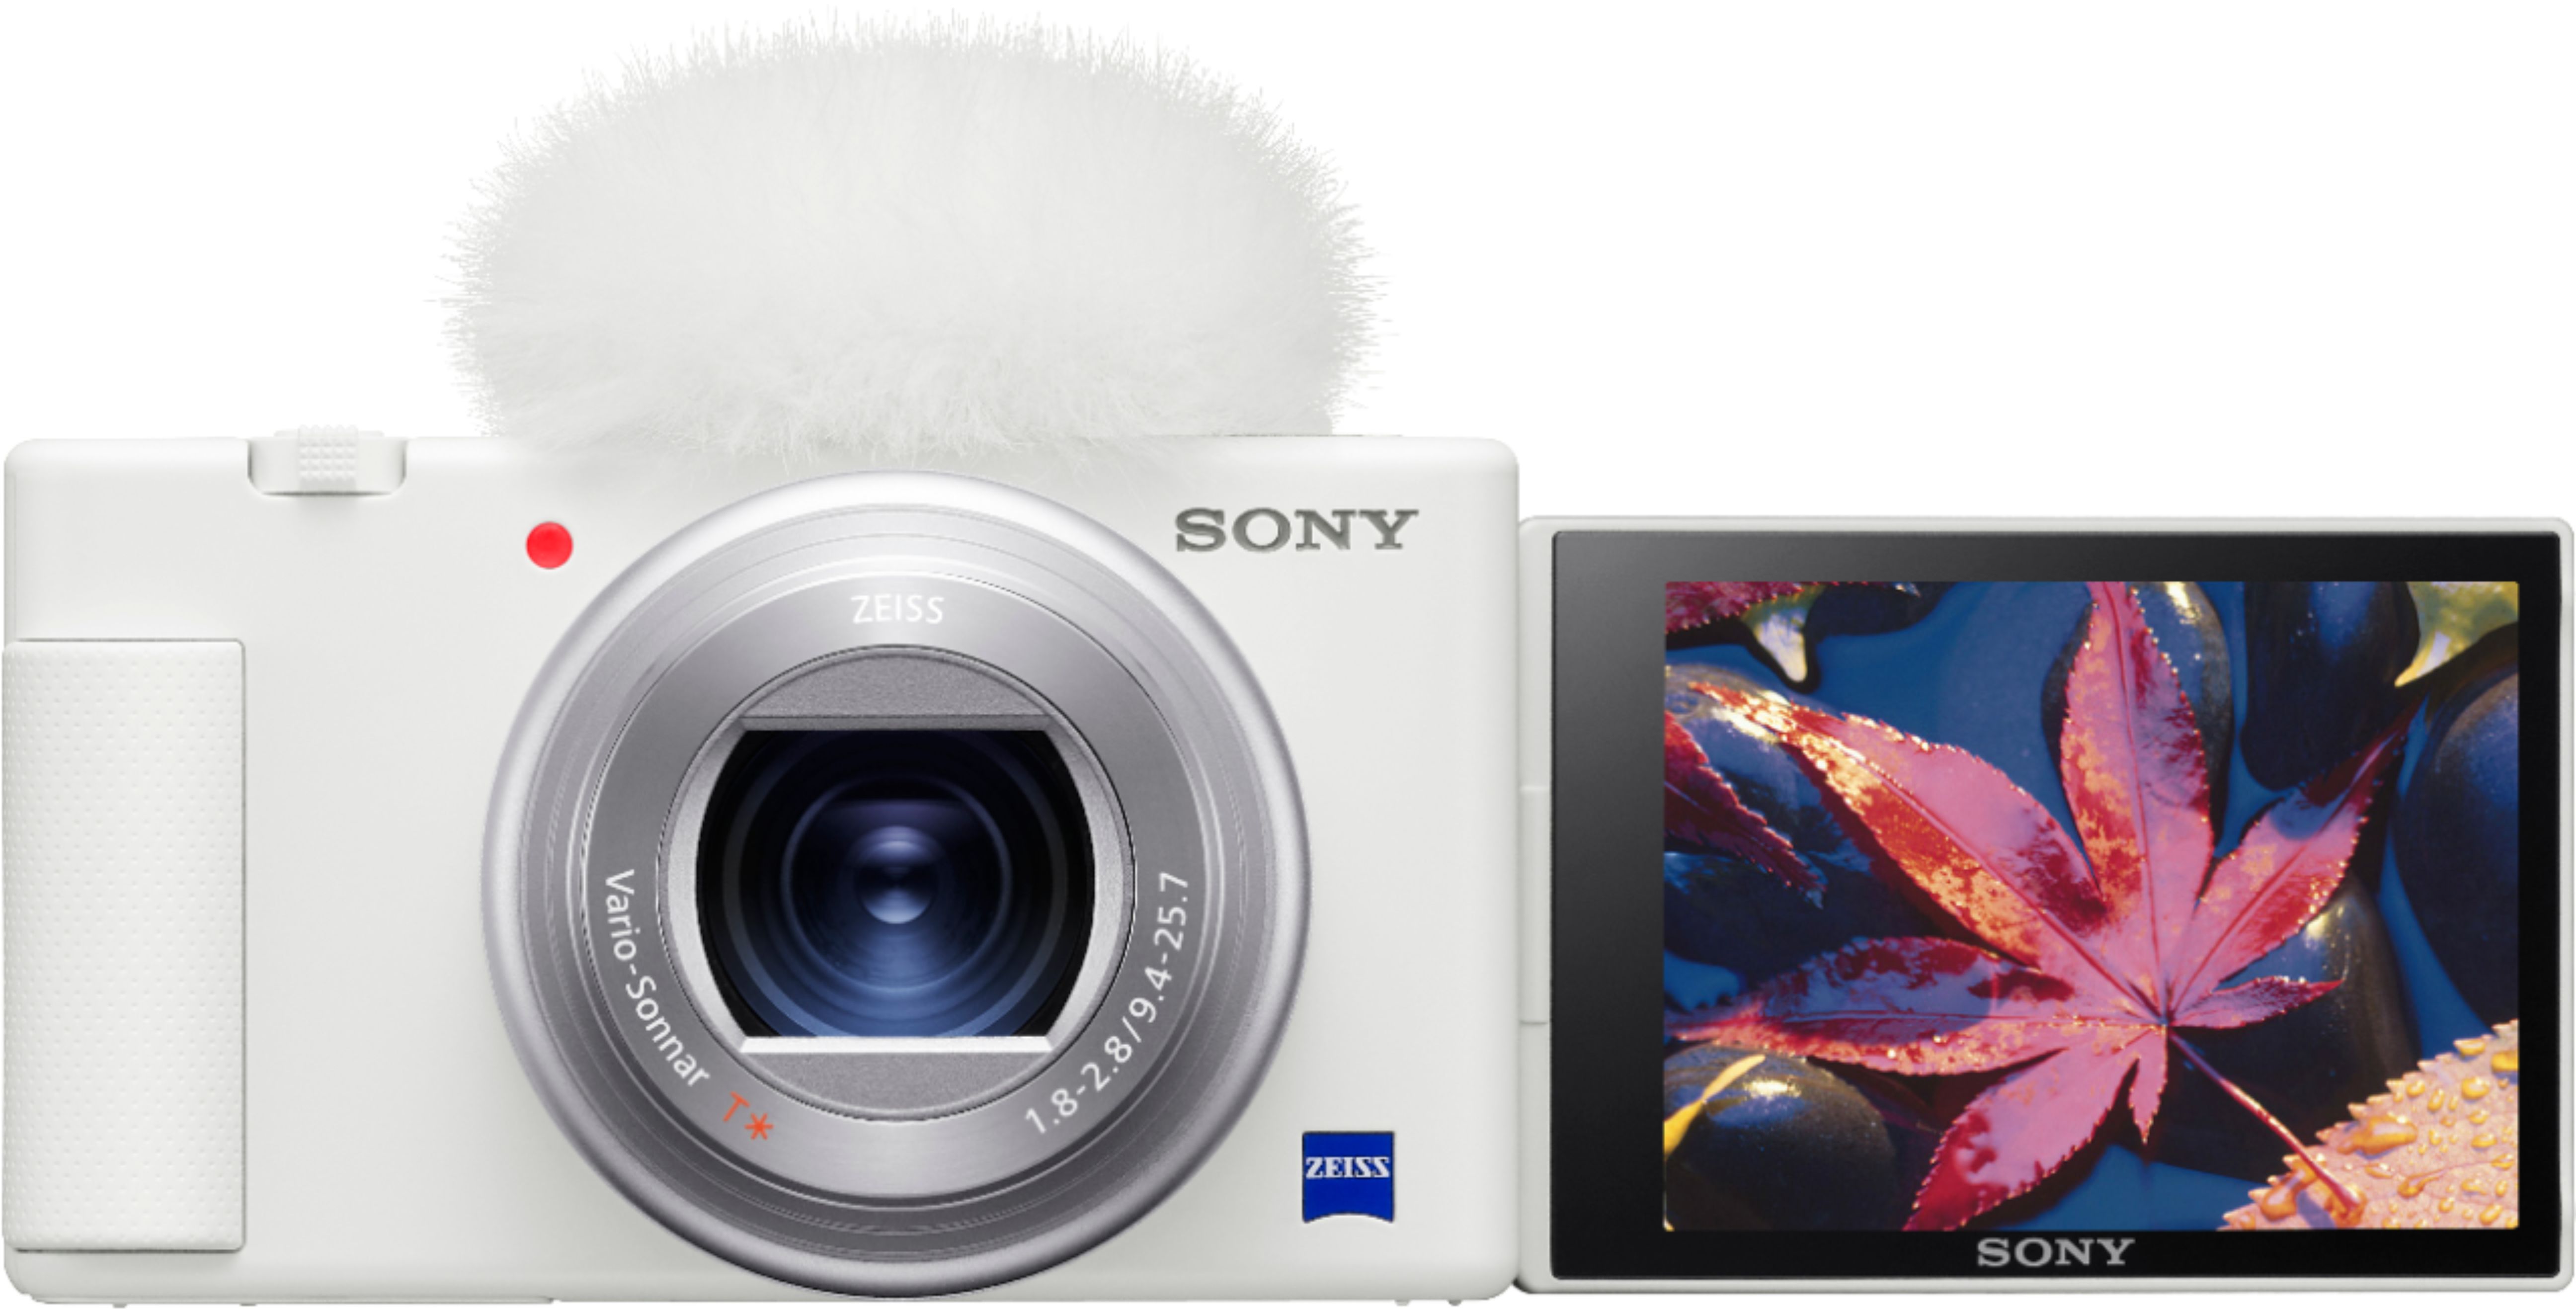 wagon Uitgaan zout Sony ZV-1 20.1-Megapixel Digital Camera for Content Creators and Vloggers  White DCZV1/W - Best Buy